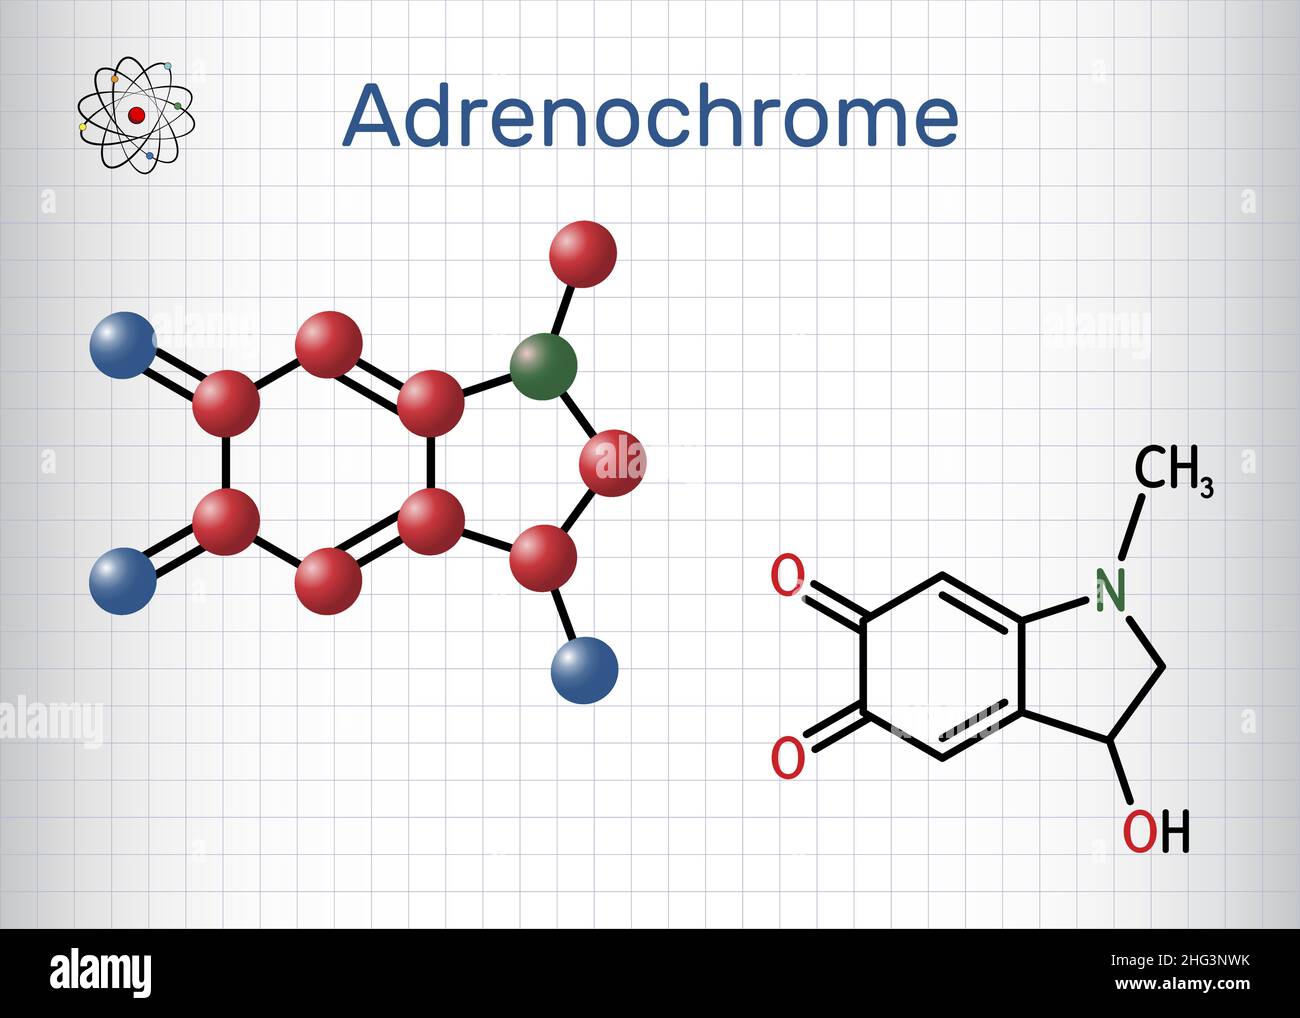 Adrenochrome, adraxone molecule. It is produced by the oxidation of adrenaline. Structural chemical formula and molecule model. Sheet of paper in a ca Stock Vector